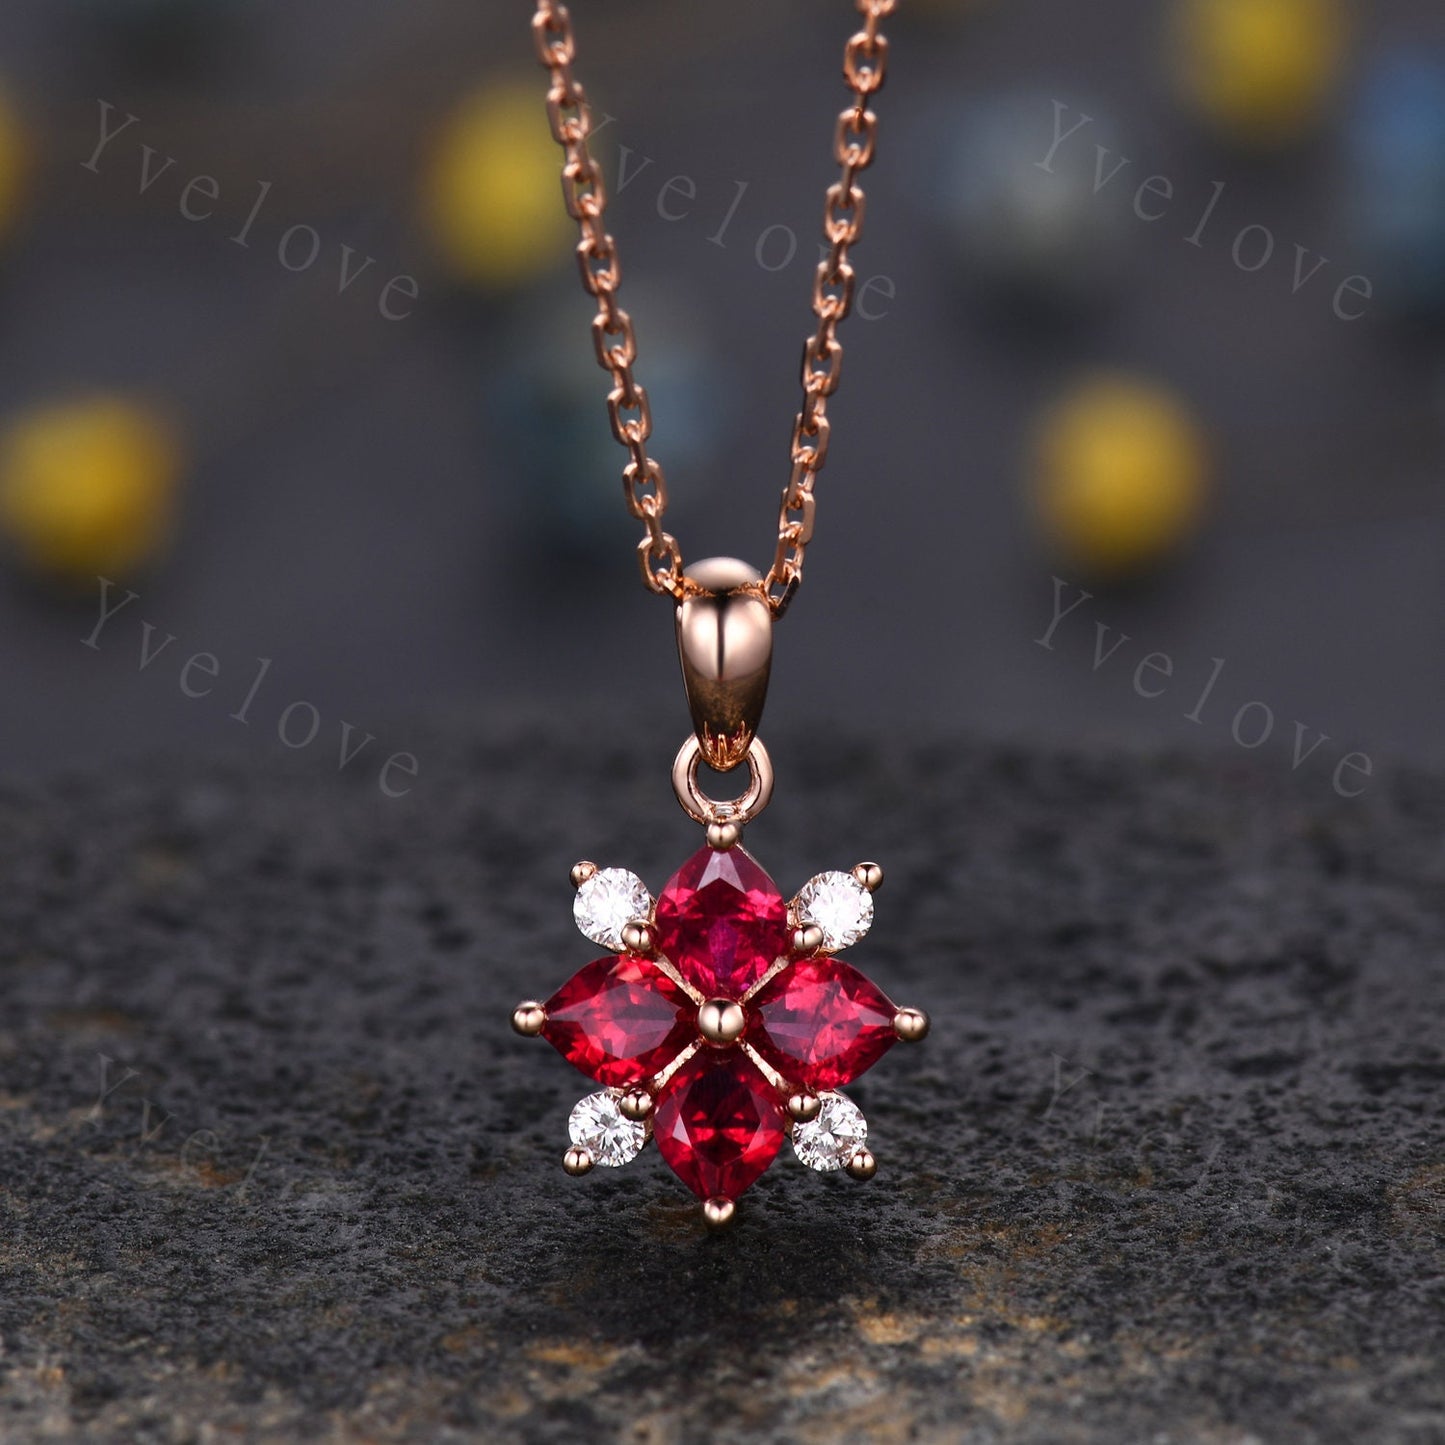 Vintage Natural Red Ruby Diamond Necklace,Pink Gems Pendant Floral Diamond Jewelry Delicate Dainty Necklace Gift For Women,14k White Gold